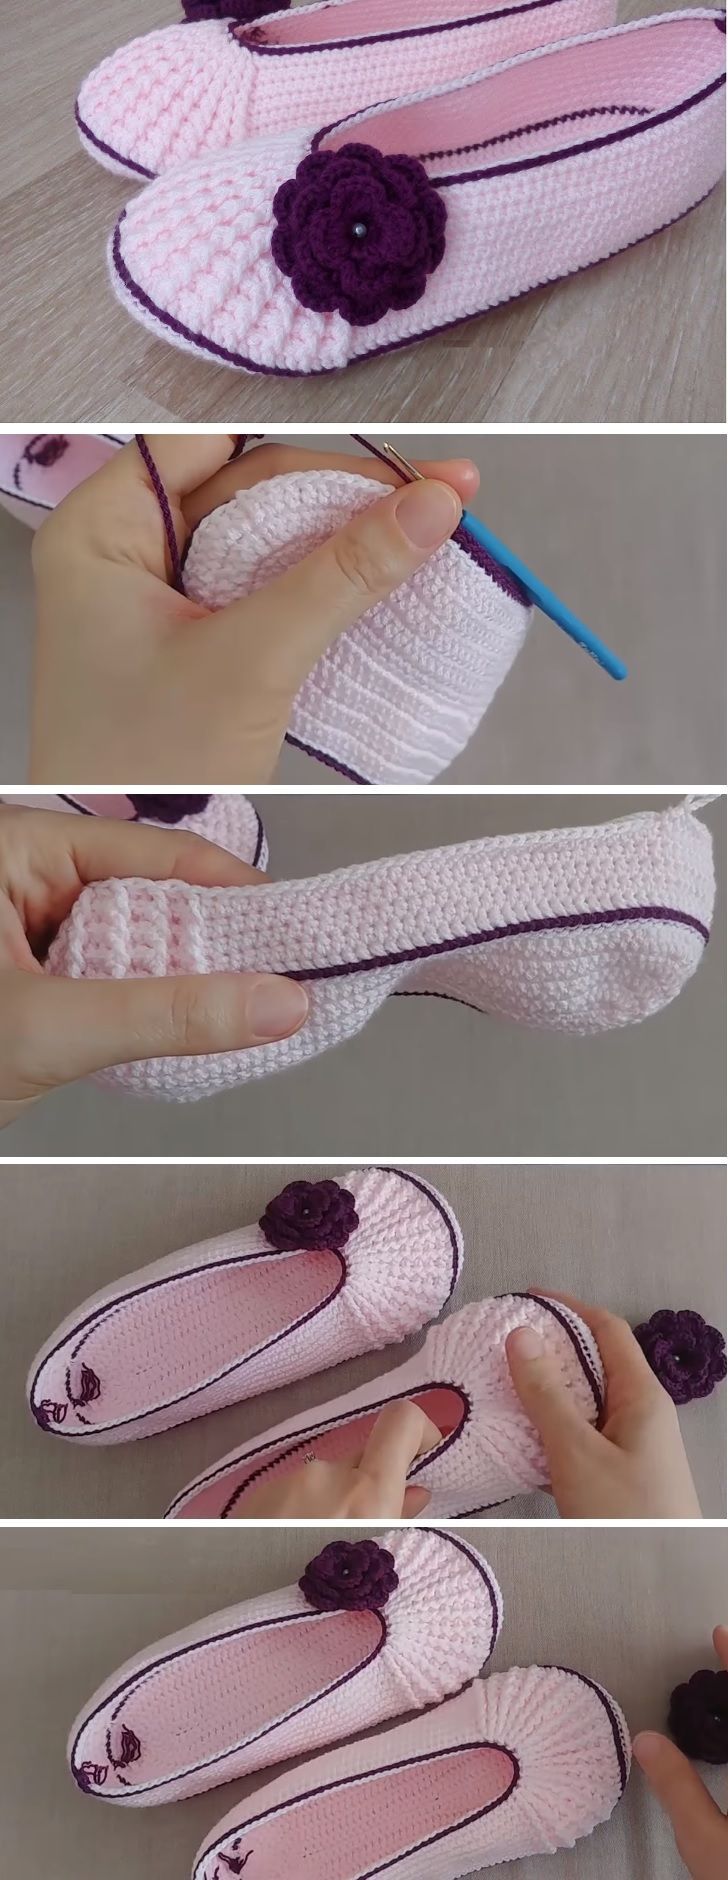 How-to-Crochet-These-Beautiful-Slippers-Crochet-and-Knitting.jpg